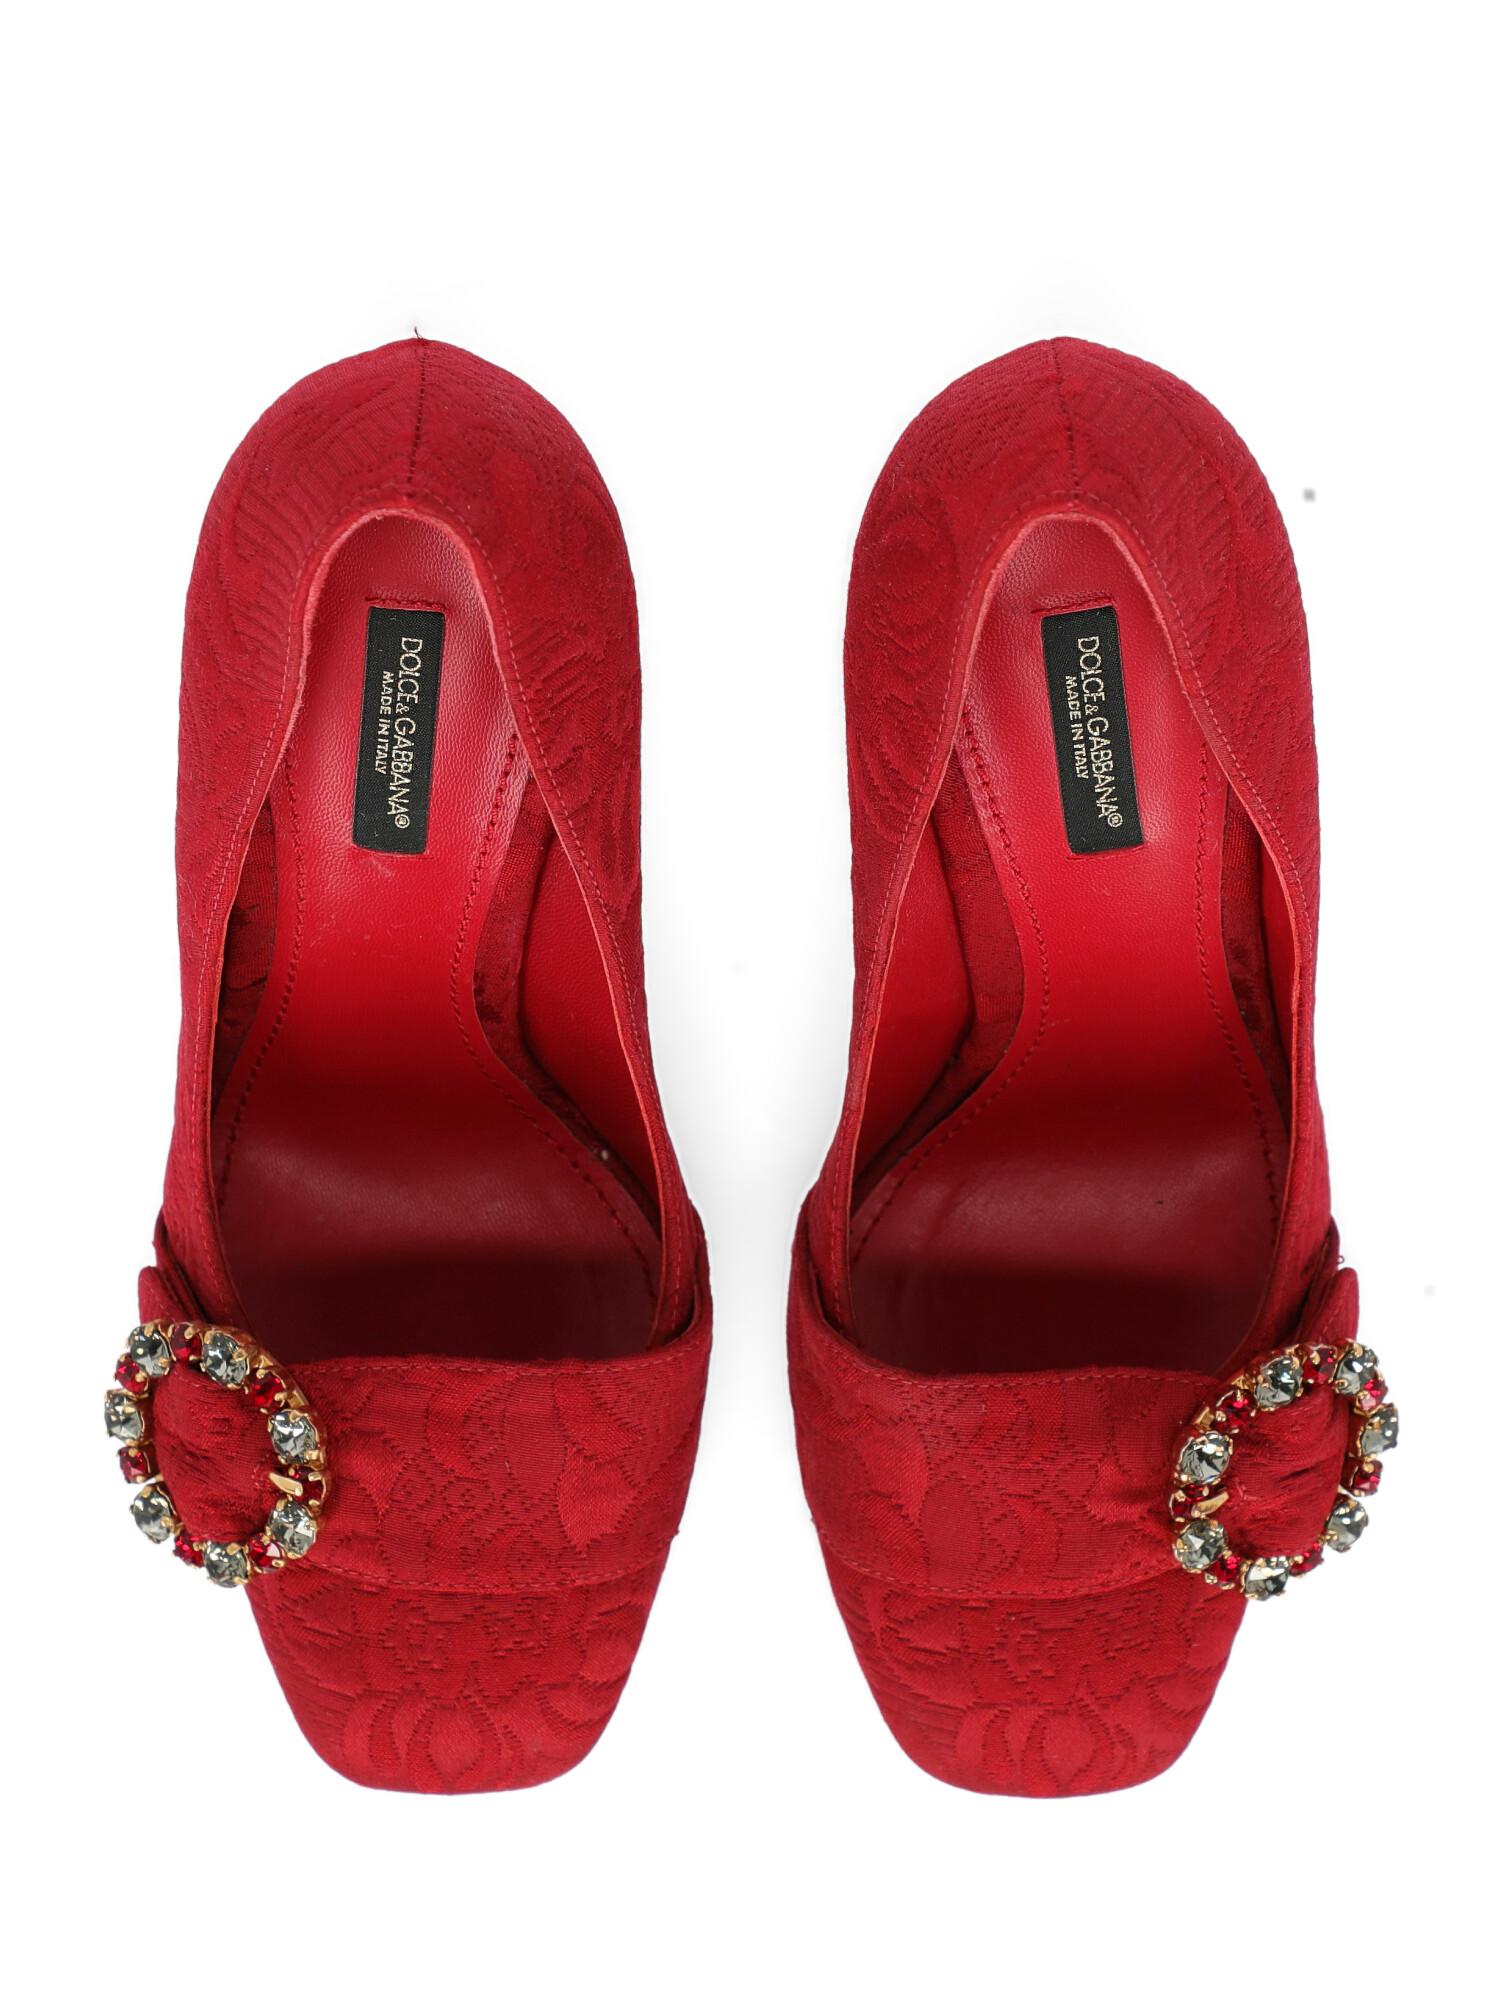 Dolce & Gabbana Woman Pumps Red Fabric IT 39 For Sale 2